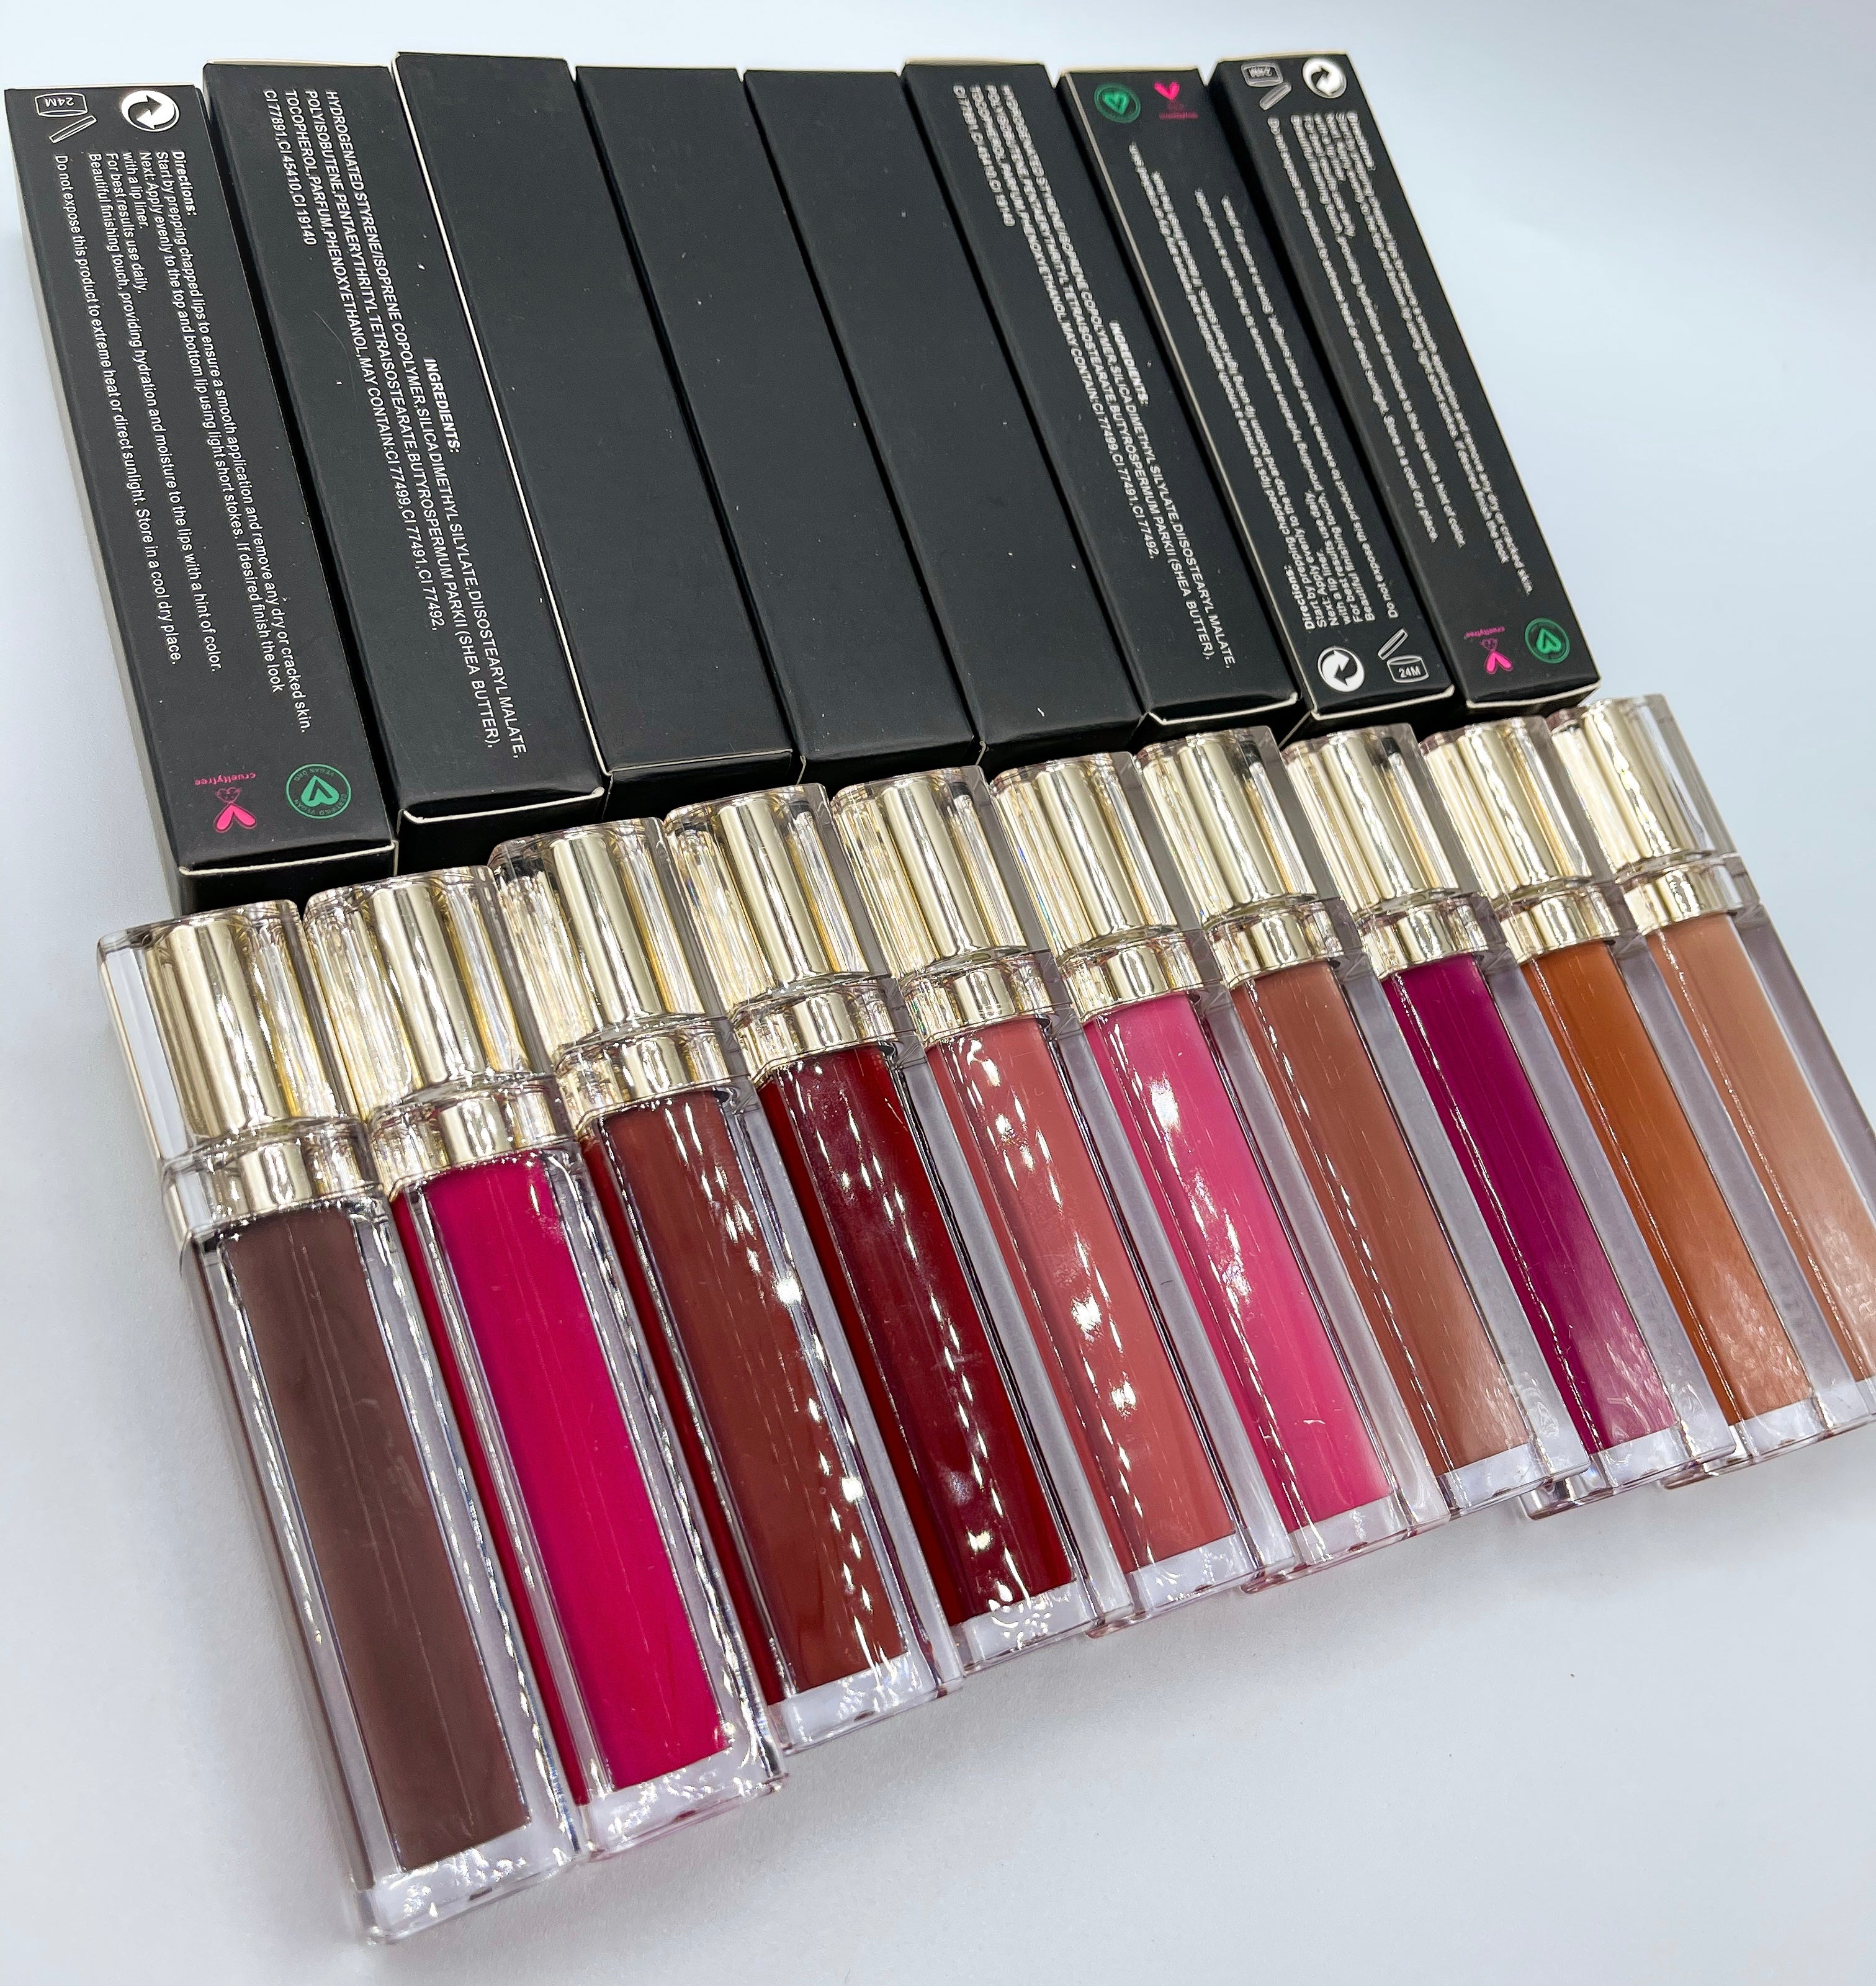 Wholesale Lipgloss (High Quality)